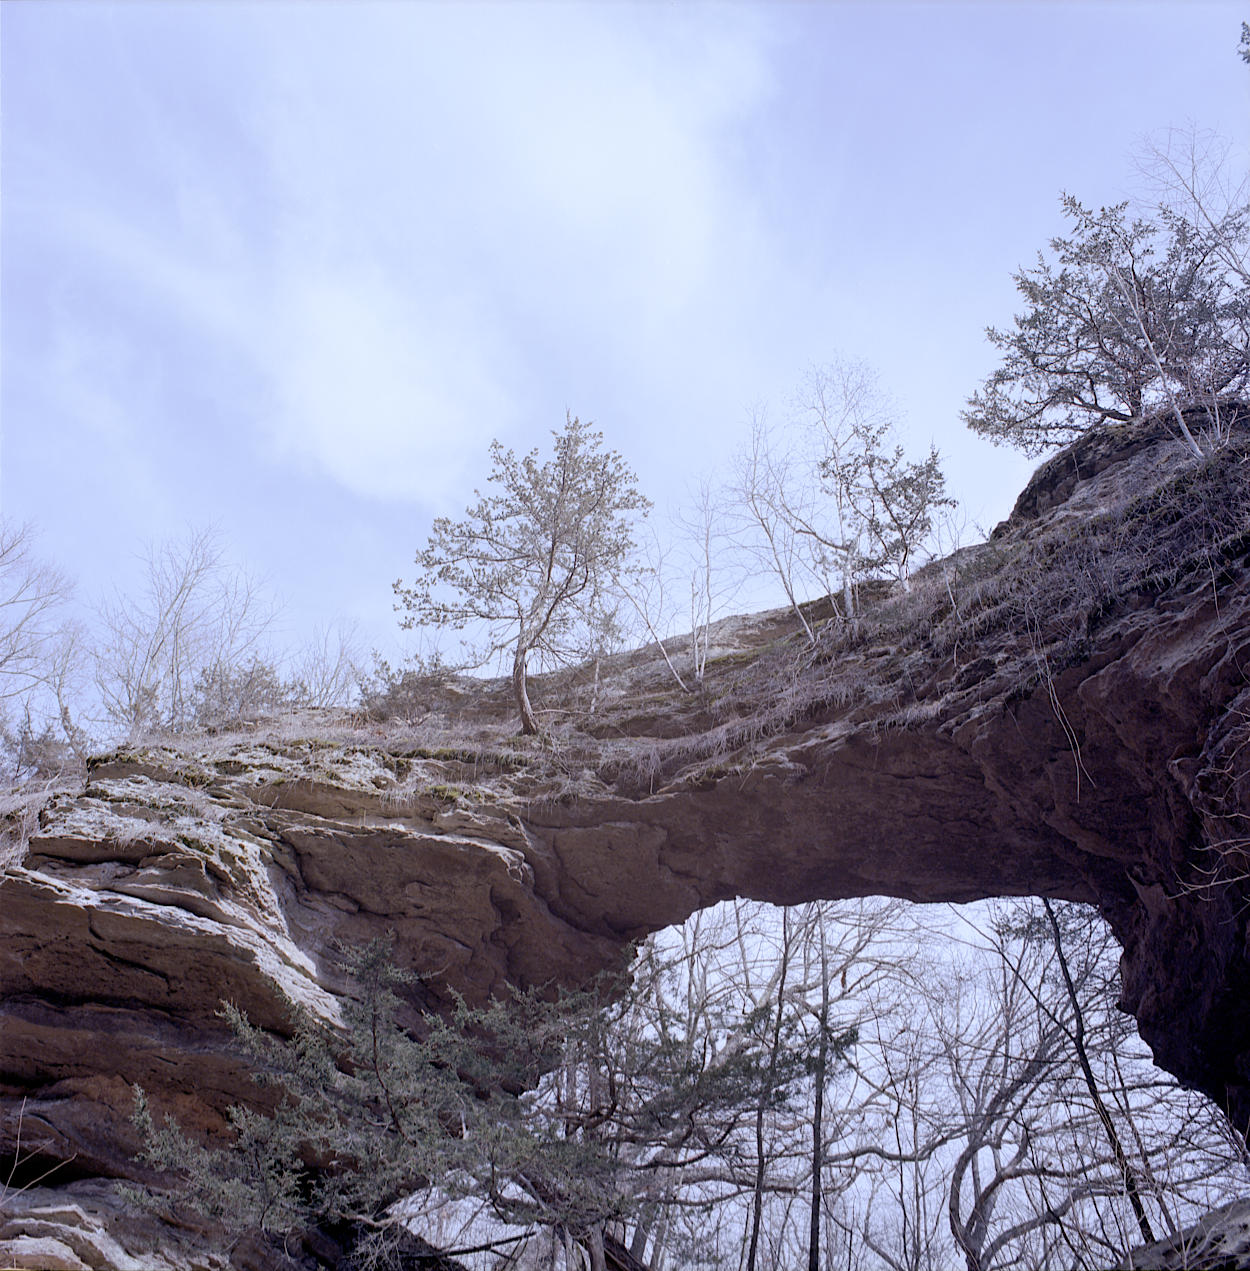 Several juvenile trees sprouting from a geological bridge.